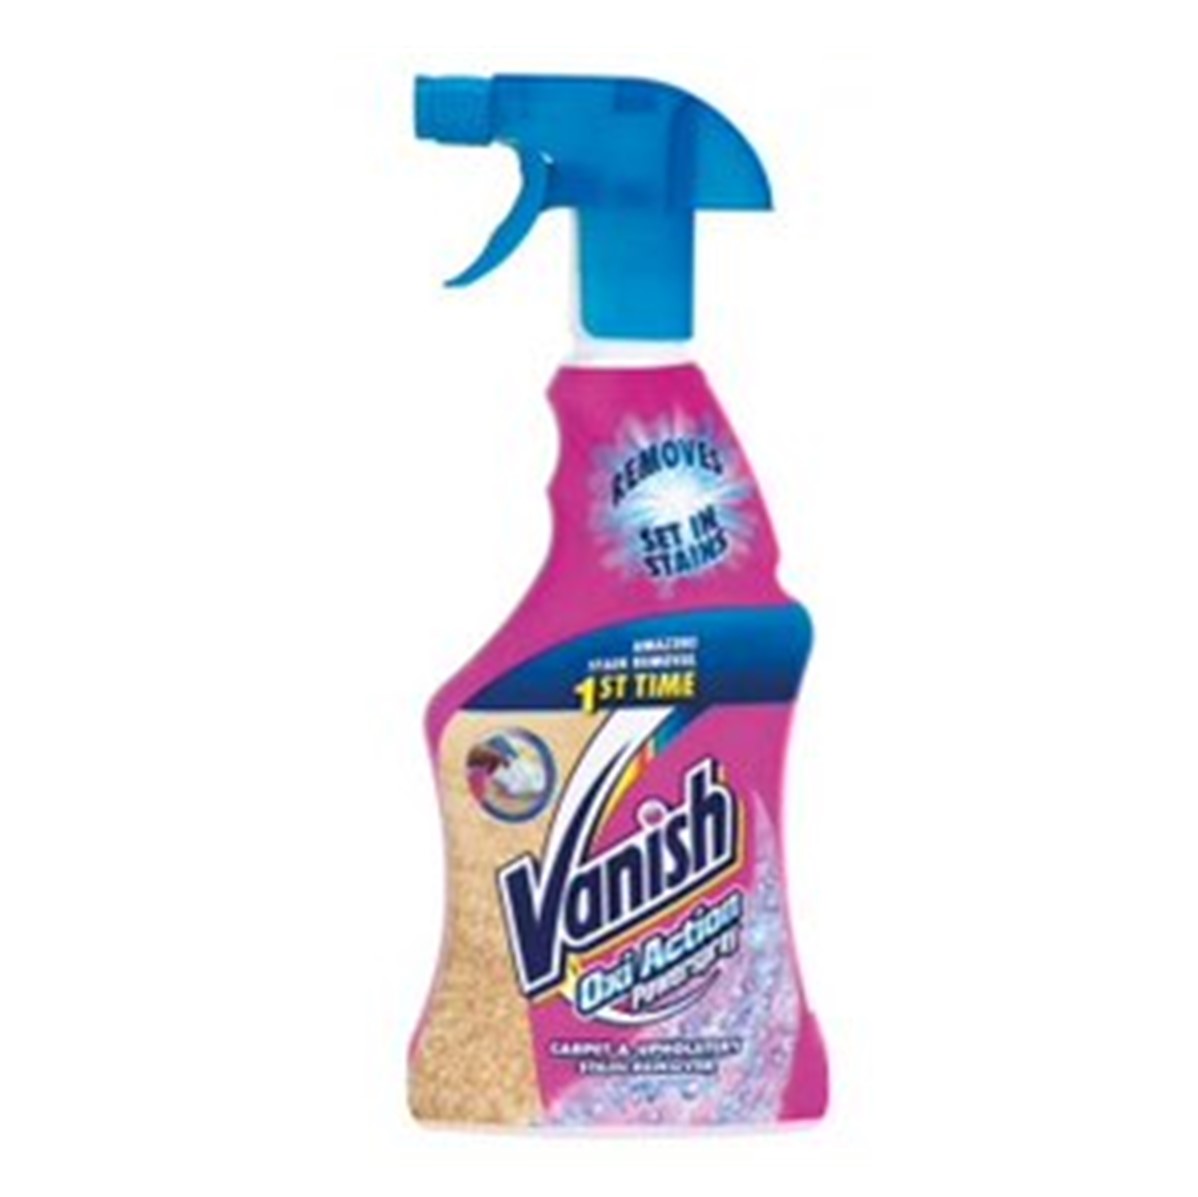 Vanish PRO Oxi Action Carpet + Upholstery Stain Remover - 500ml spray